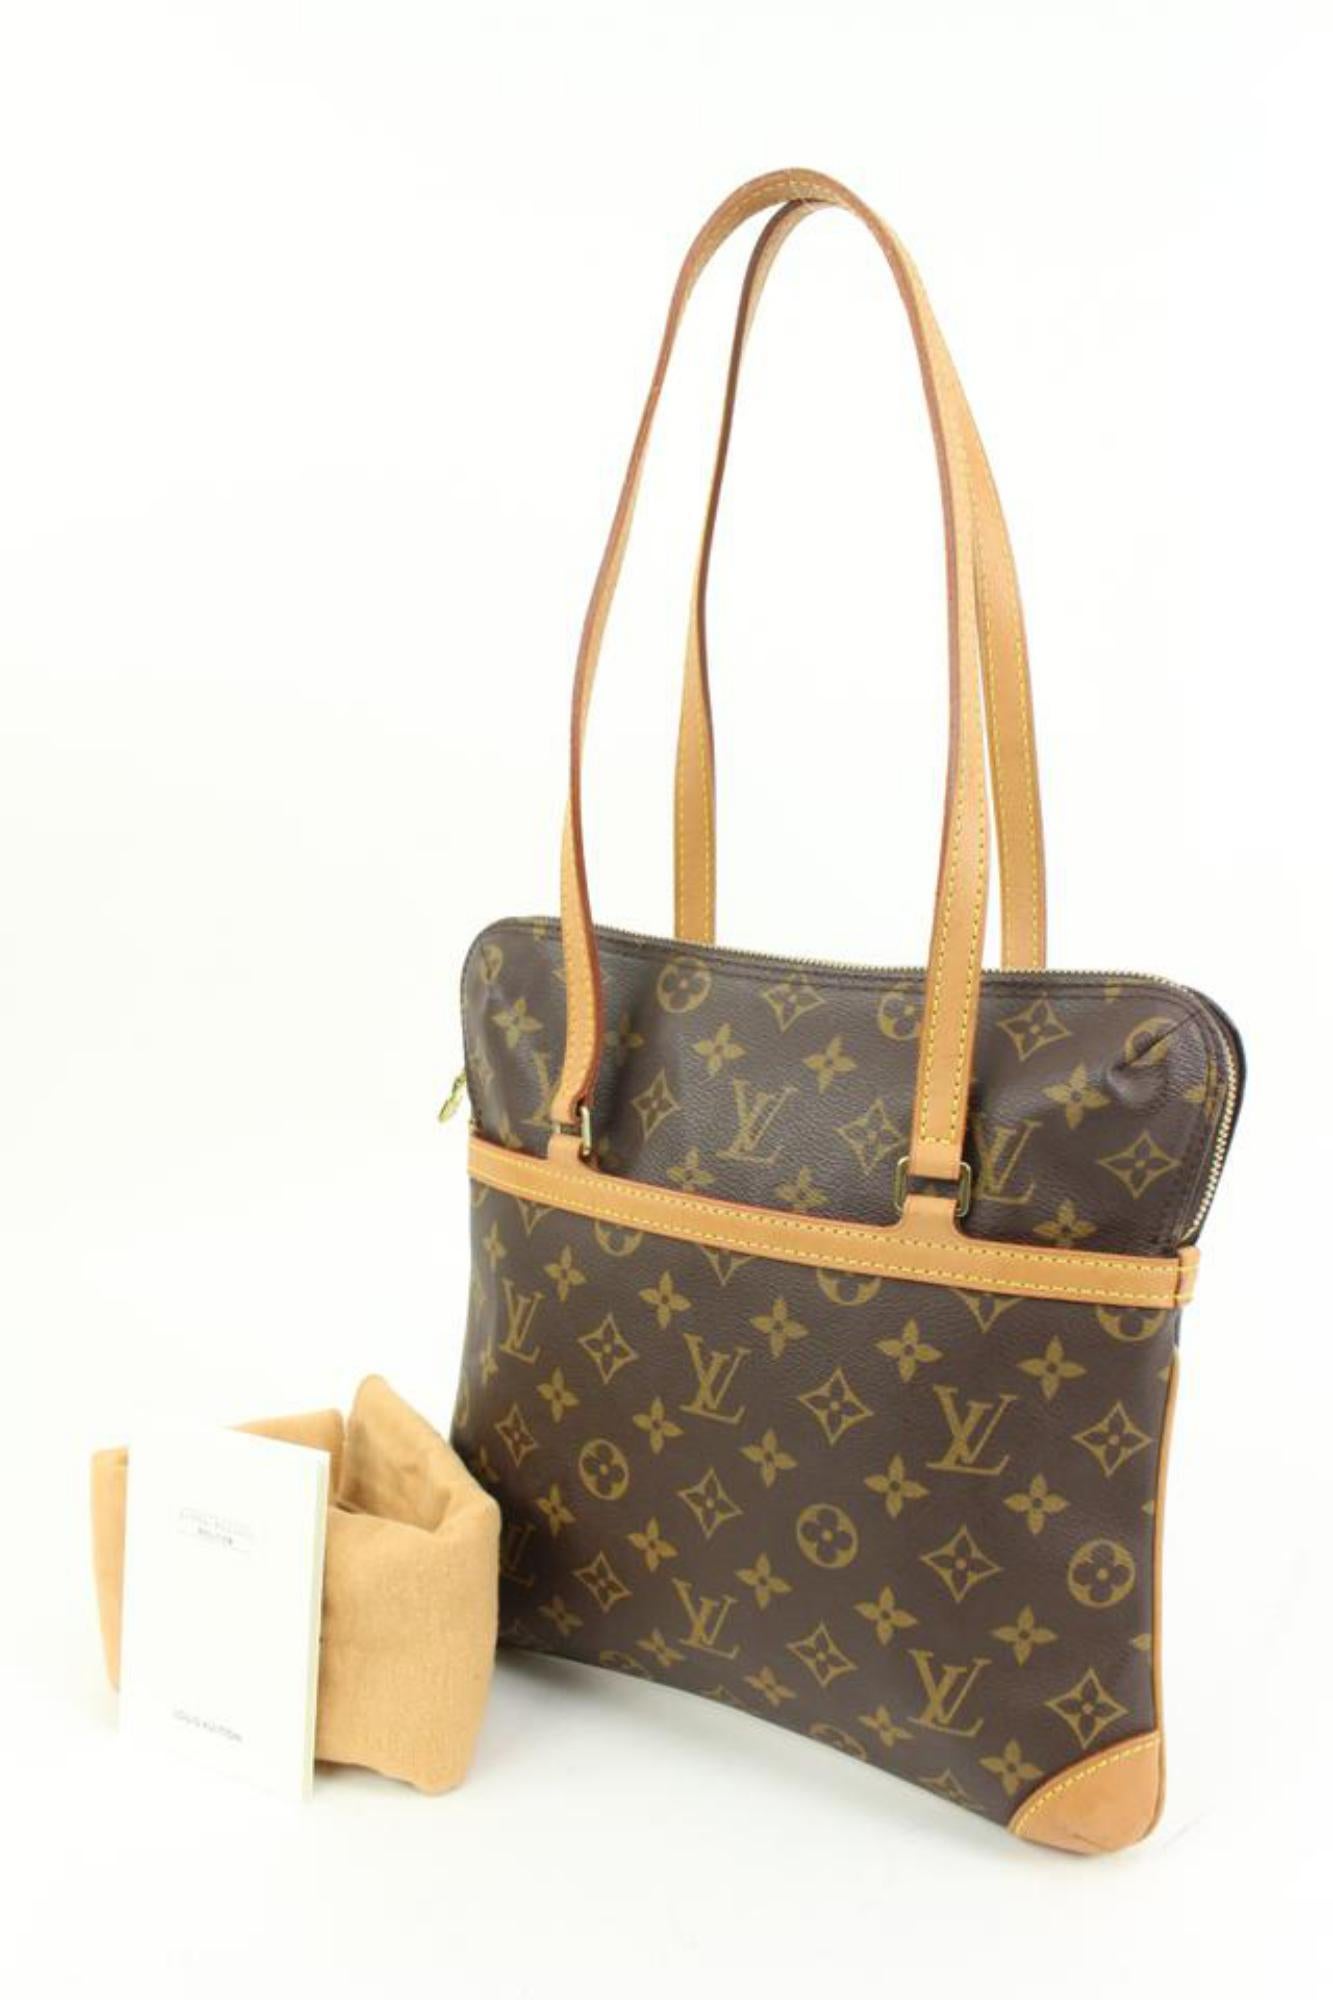 Louis Vuitton Discontinued Monogram Coussin GM Shoulder Bag 84lv317s
Date Code/Serial Number: VI0044
Made In: France
Measurements: Length:  10.75